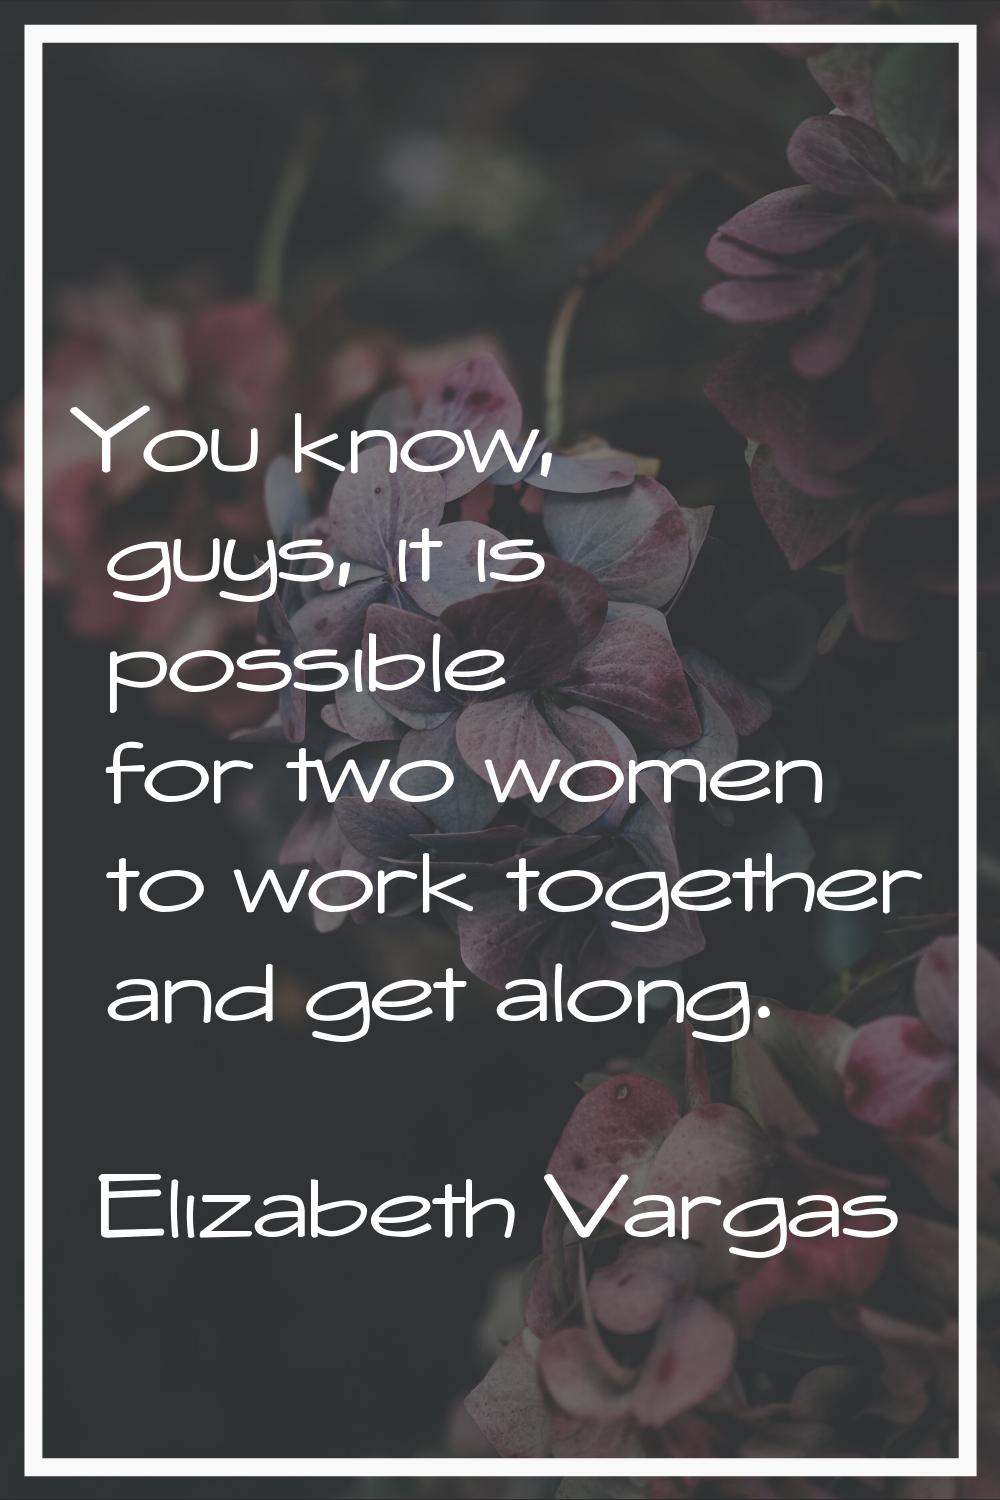 You know, guys, it is possible for two women to work together and get along.